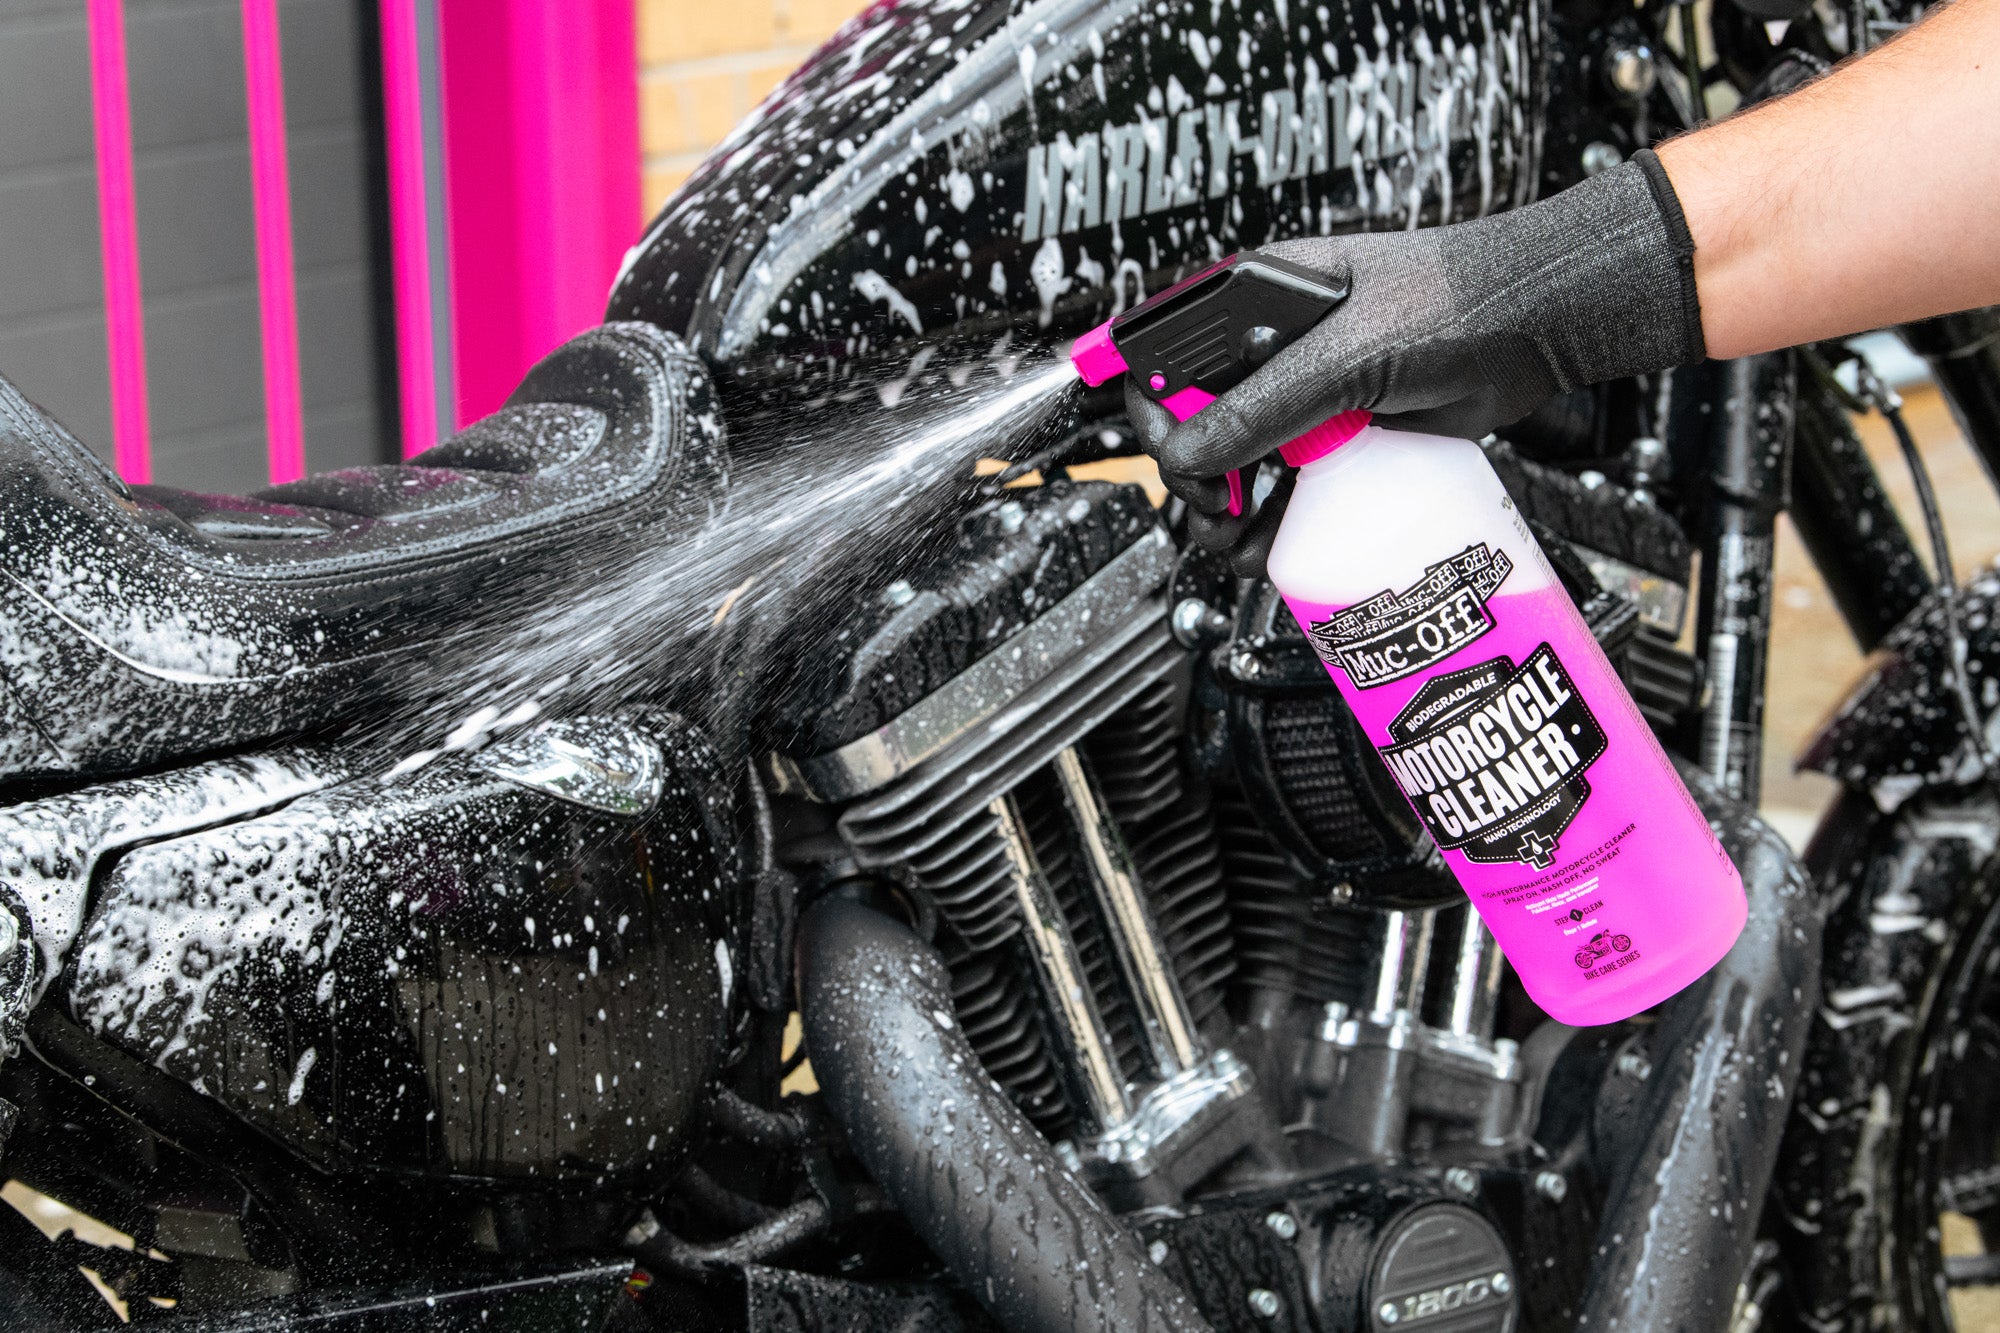 Best Way to Clean Your Motorcycle